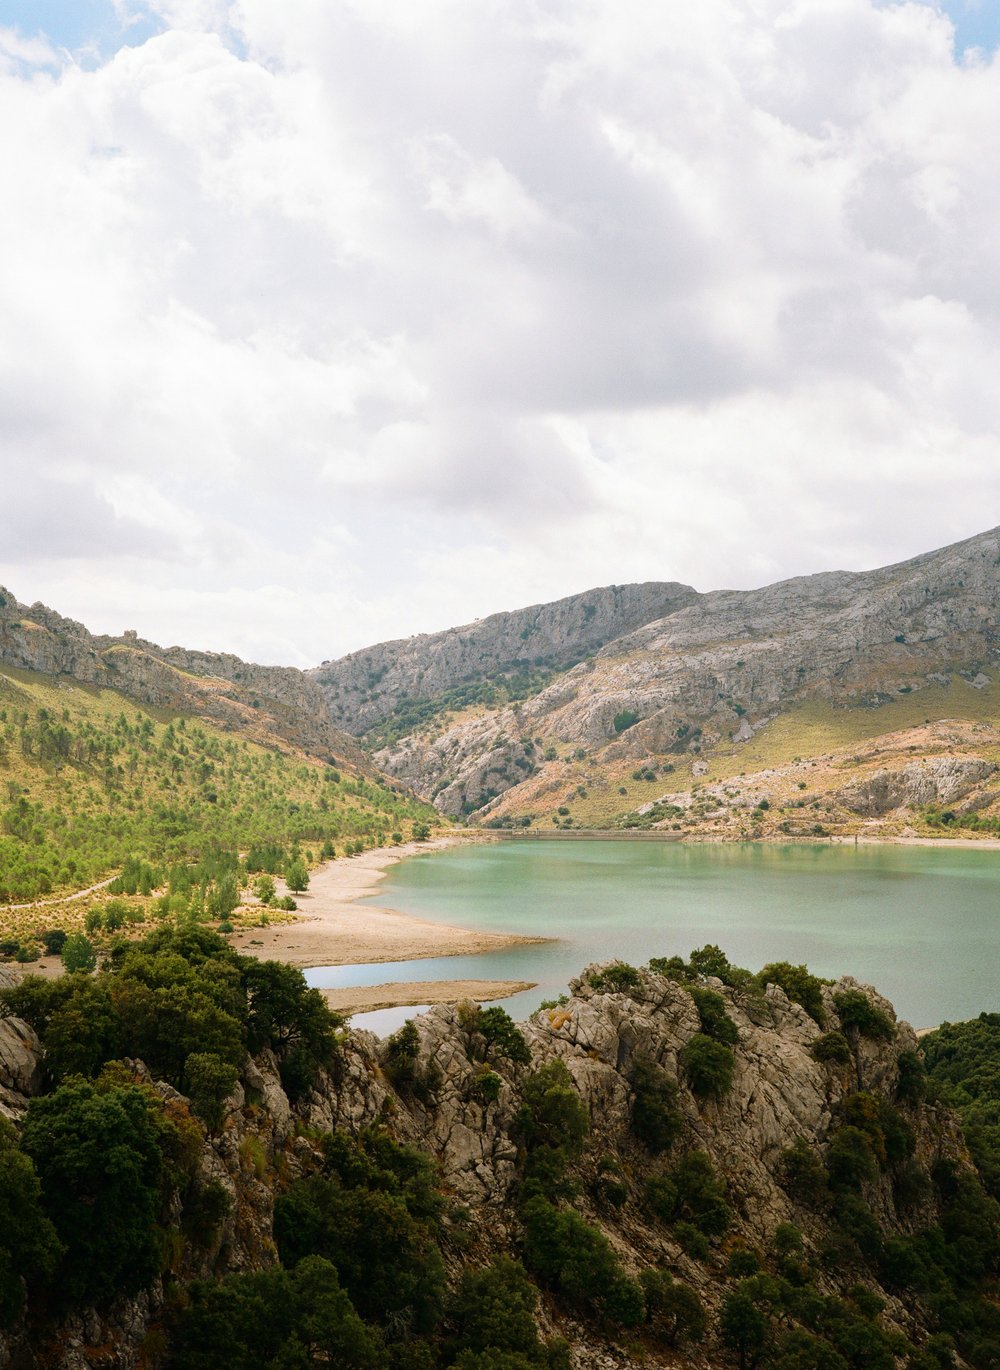  film image of a lake in the mountains of Mallorca, Spain 